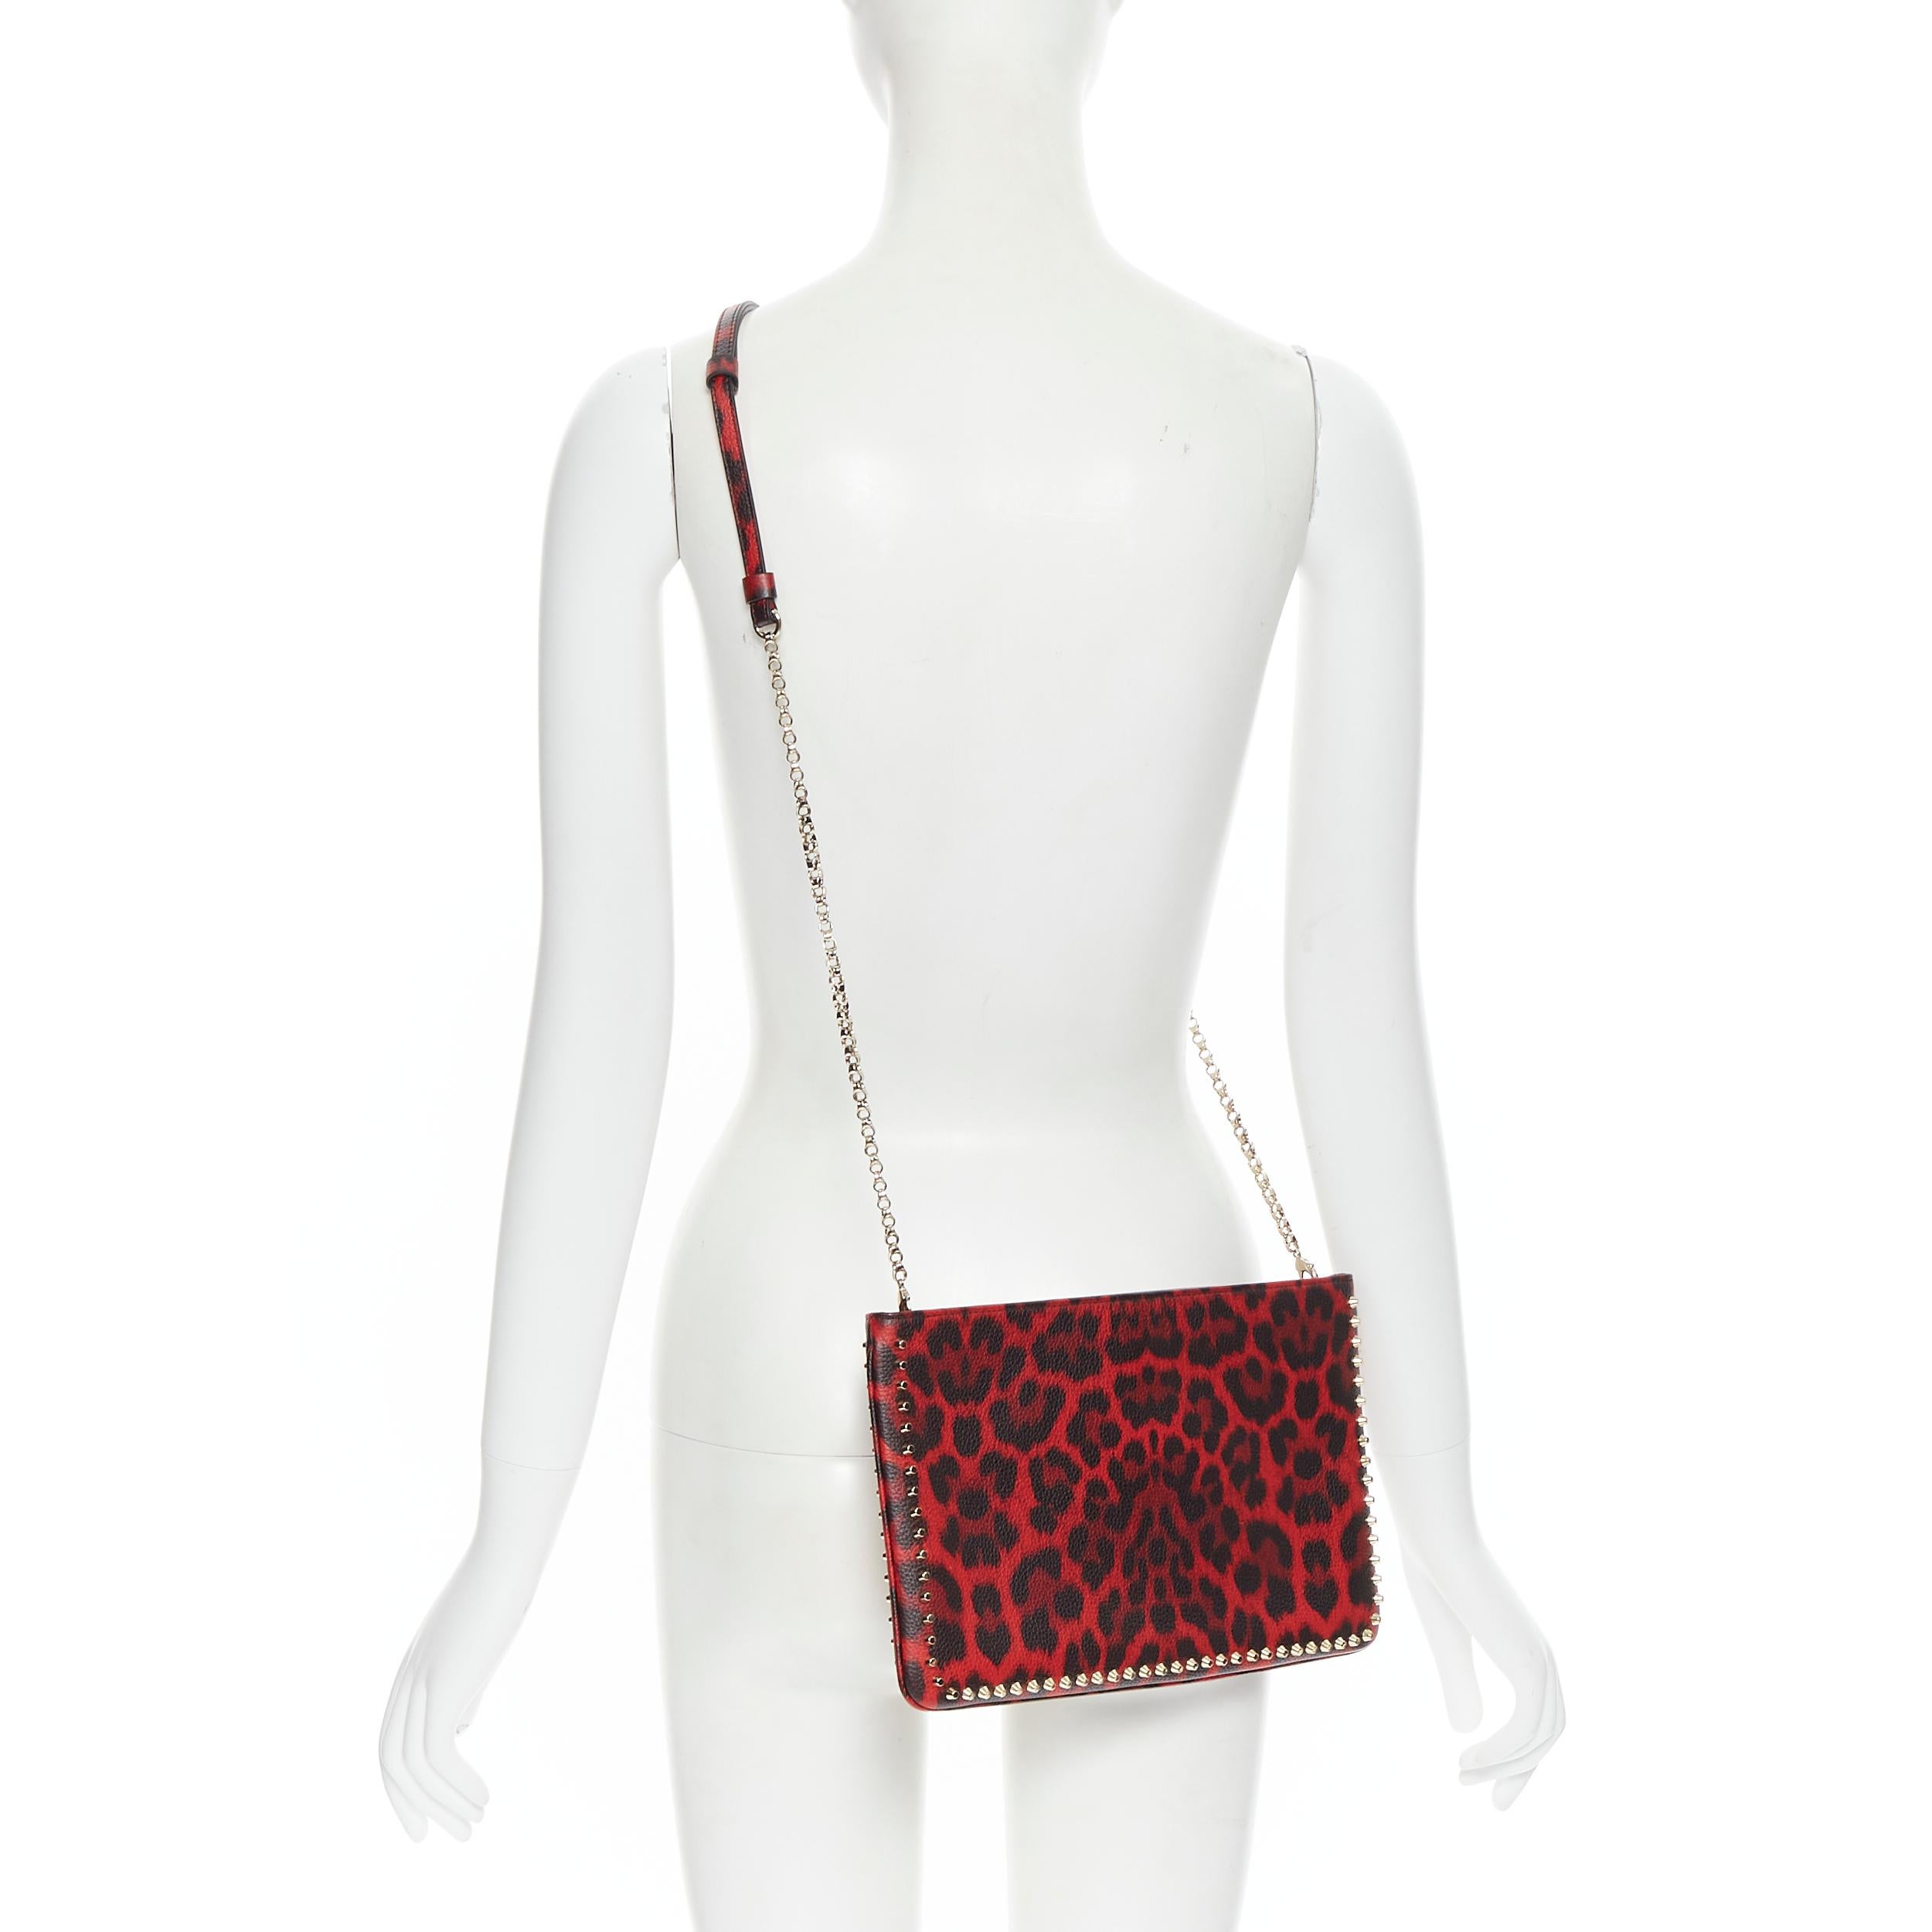 new CHRISTIAN LOUBOUTIN Loubiposh red leopard gold stud crossbody clutch bag 
Reference: TGAS/B00591 
Brand: Christian Louboutin 
Designer: Christian Louboutin 
Model: Loubiposh 
Material: Leather 
Color: Red 
Pattern: Leopard 
Closure: Zip 
Extra